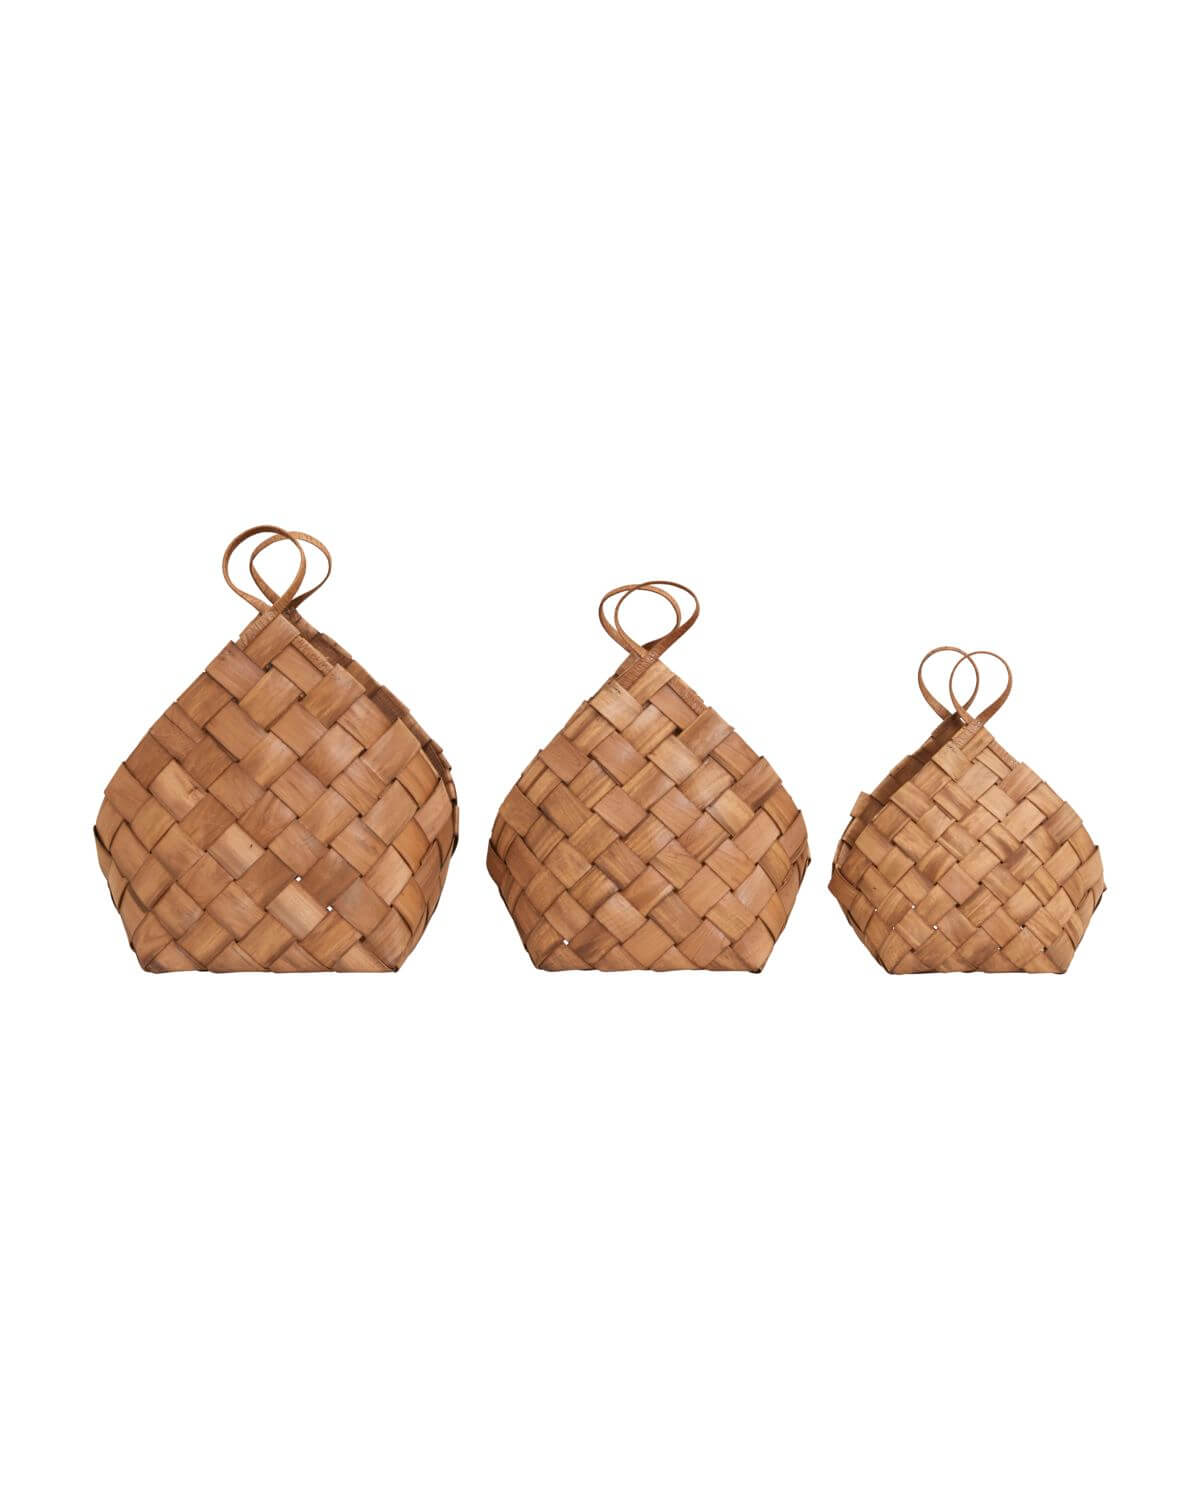 Conical Brown Baskets - Set of 3 | Pinewood & Paper | by House Doctor - Lifestory - House Doctor